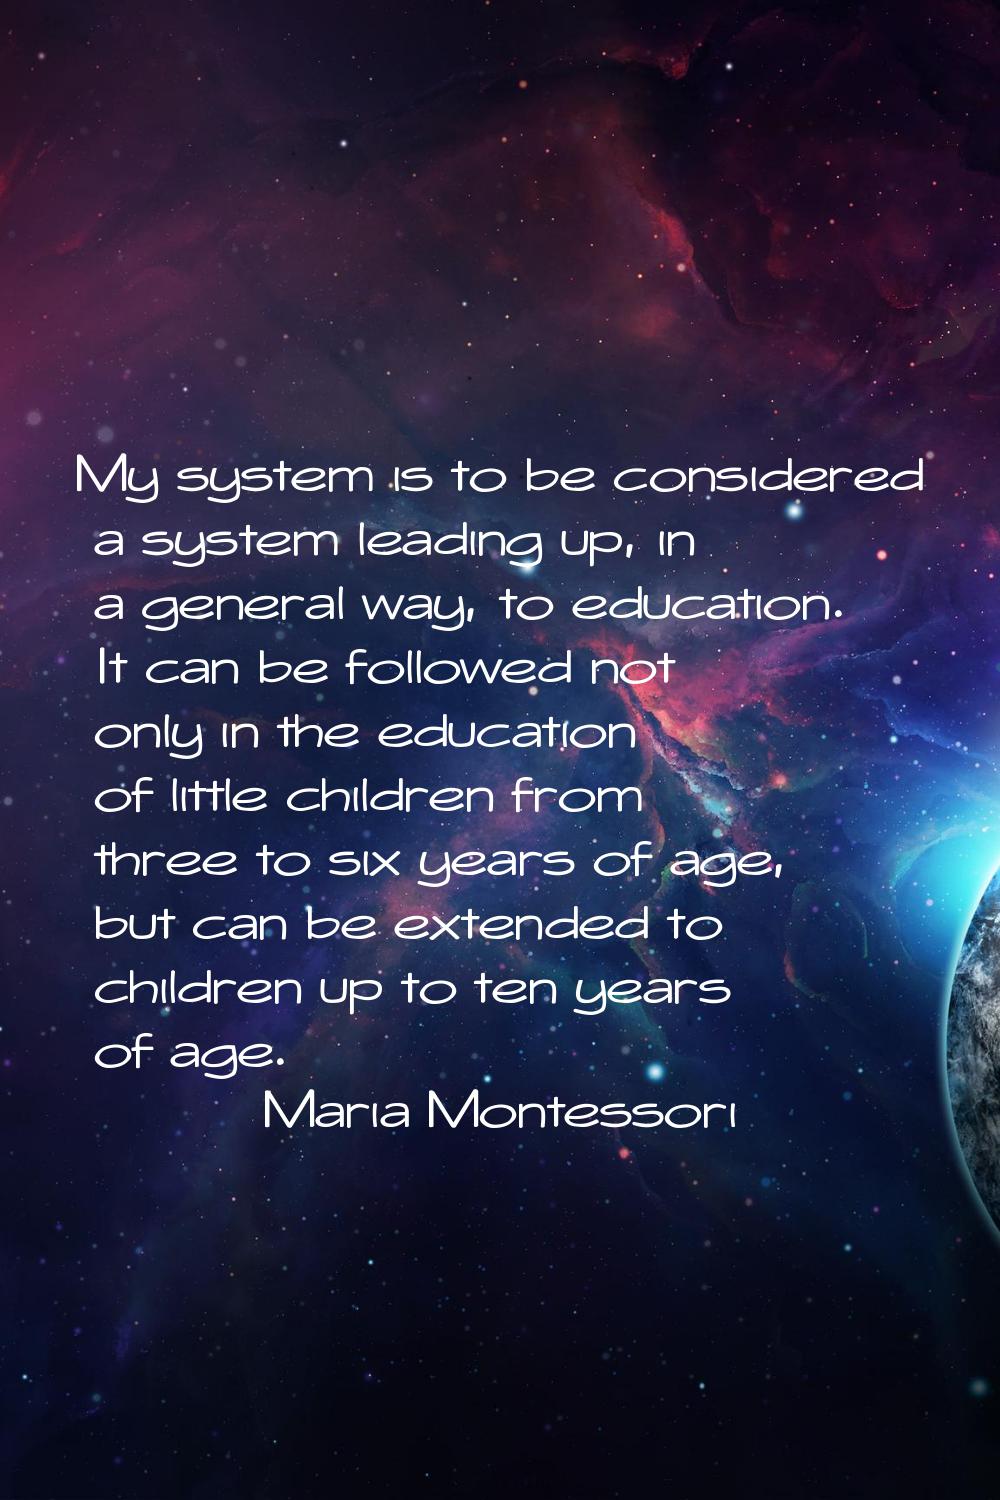 My system is to be considered a system leading up, in a general way, to education. It can be follow